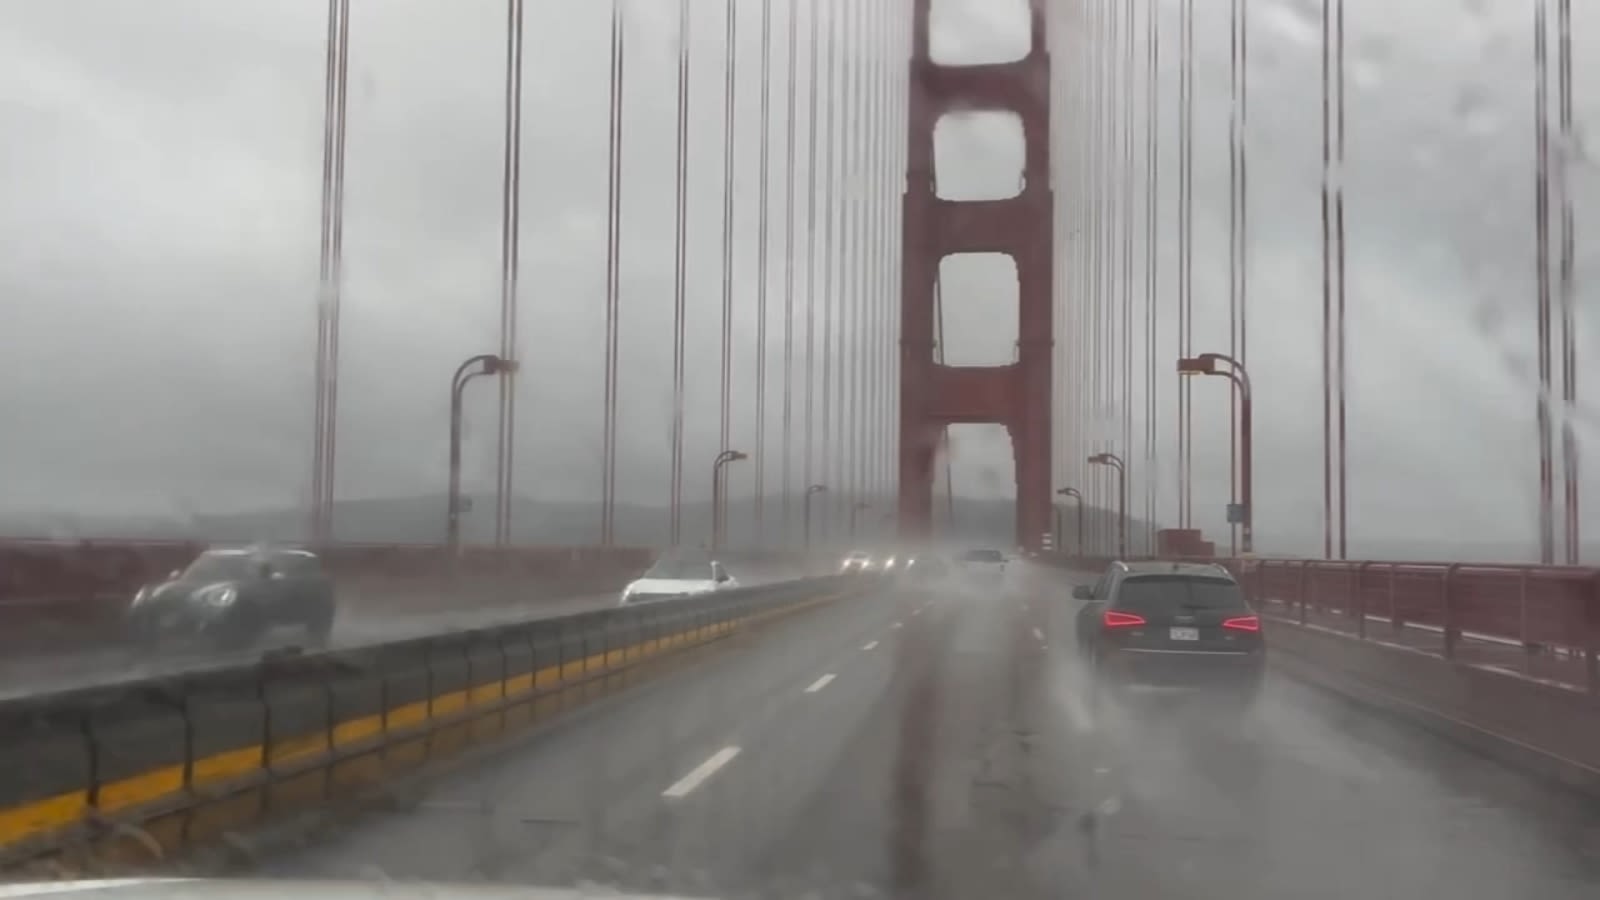 'It's pouring': Stormy Saturday cancels multiple events across Bay Area